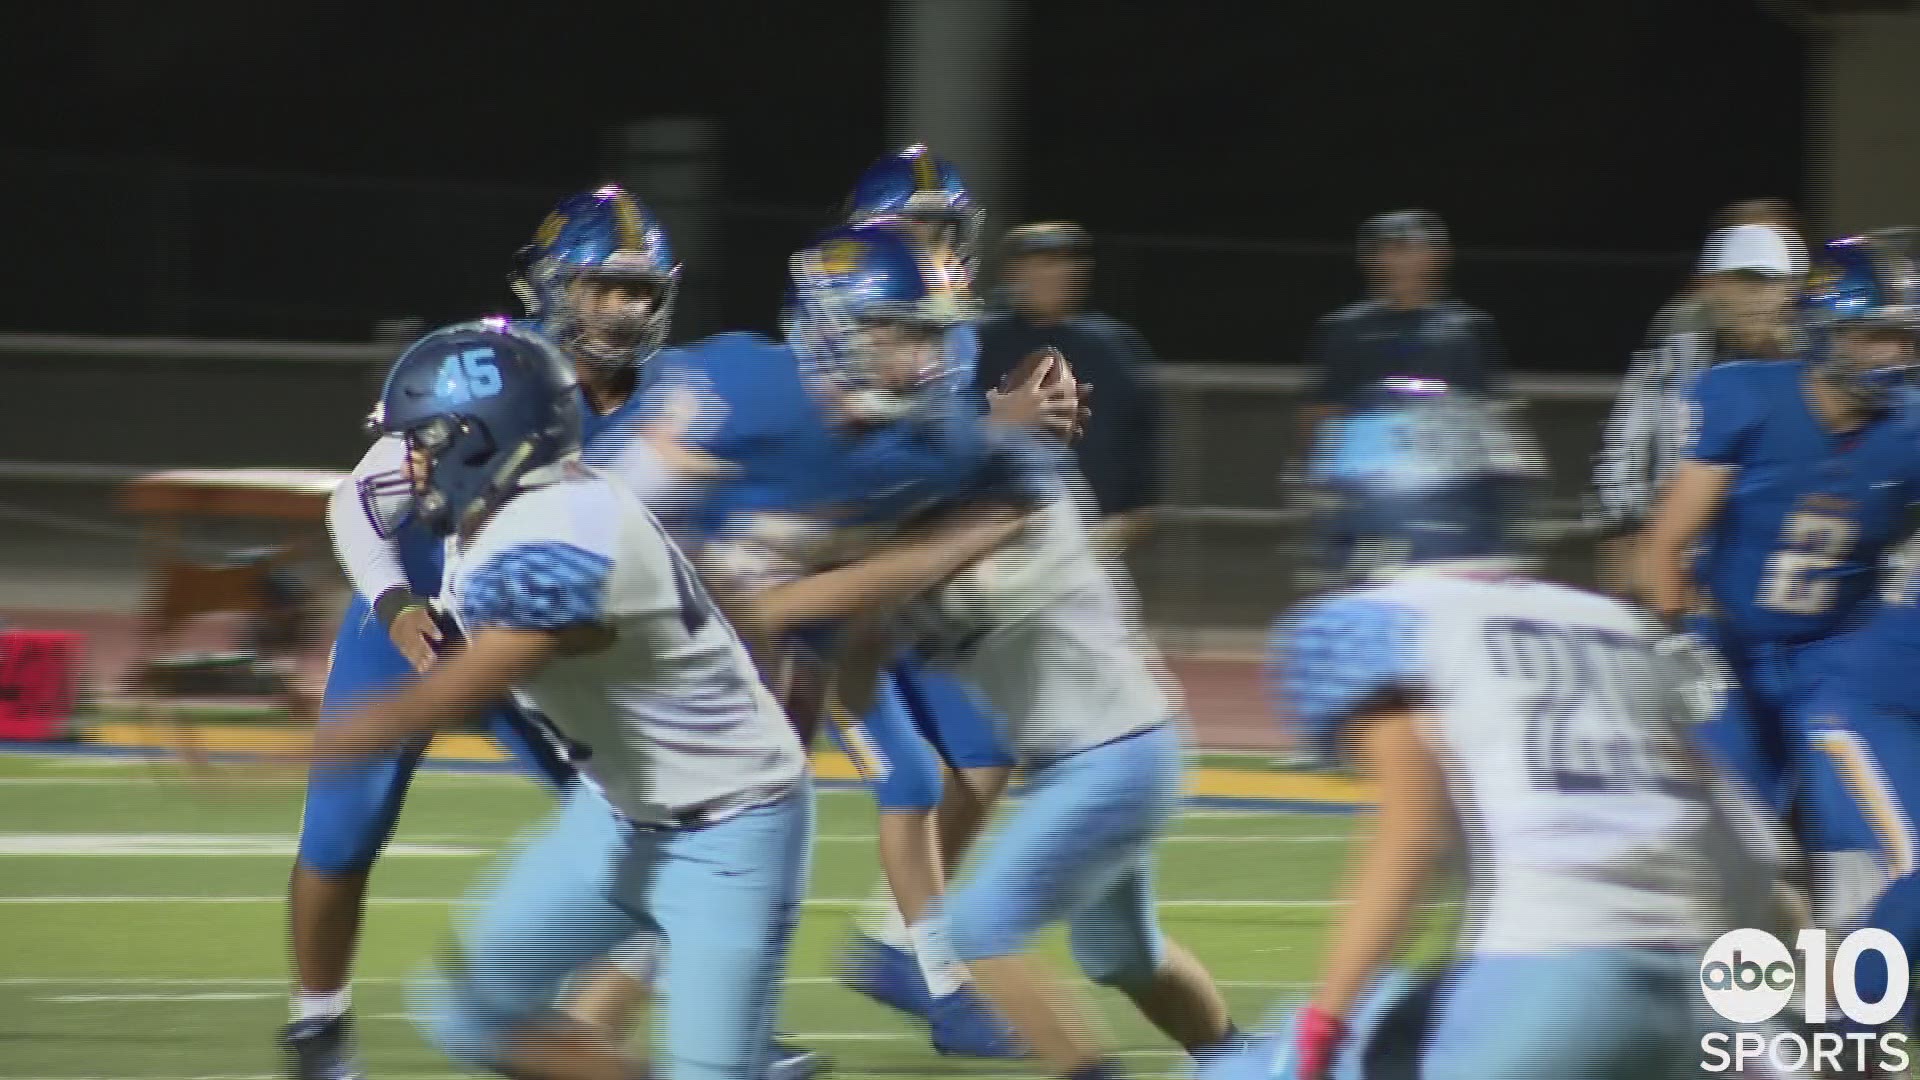 The Lincoln Fighting Zebras handed the Oakmont Vikings their first loss of the season with Friday's 28-17 victory in the ABC10 game of the week.